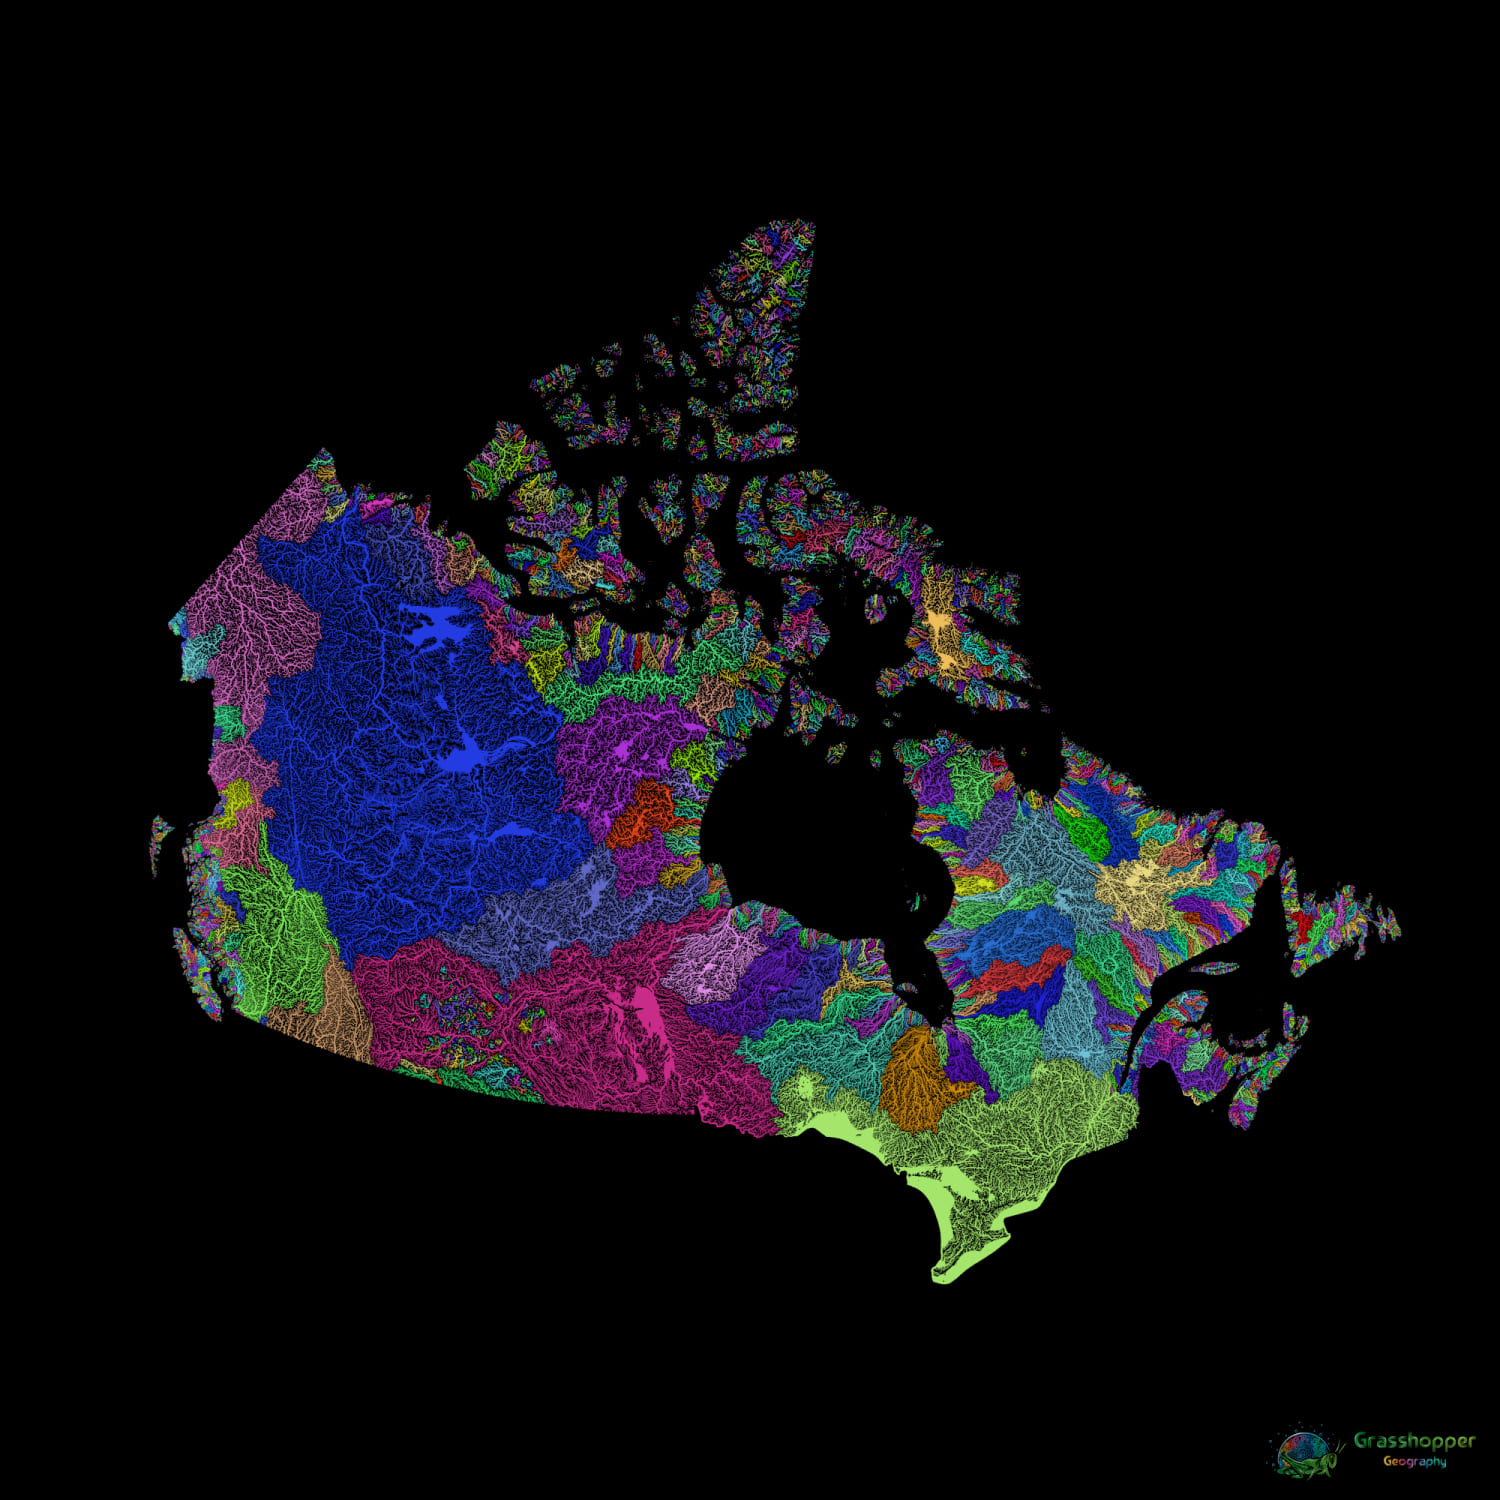 River basin map of Canada